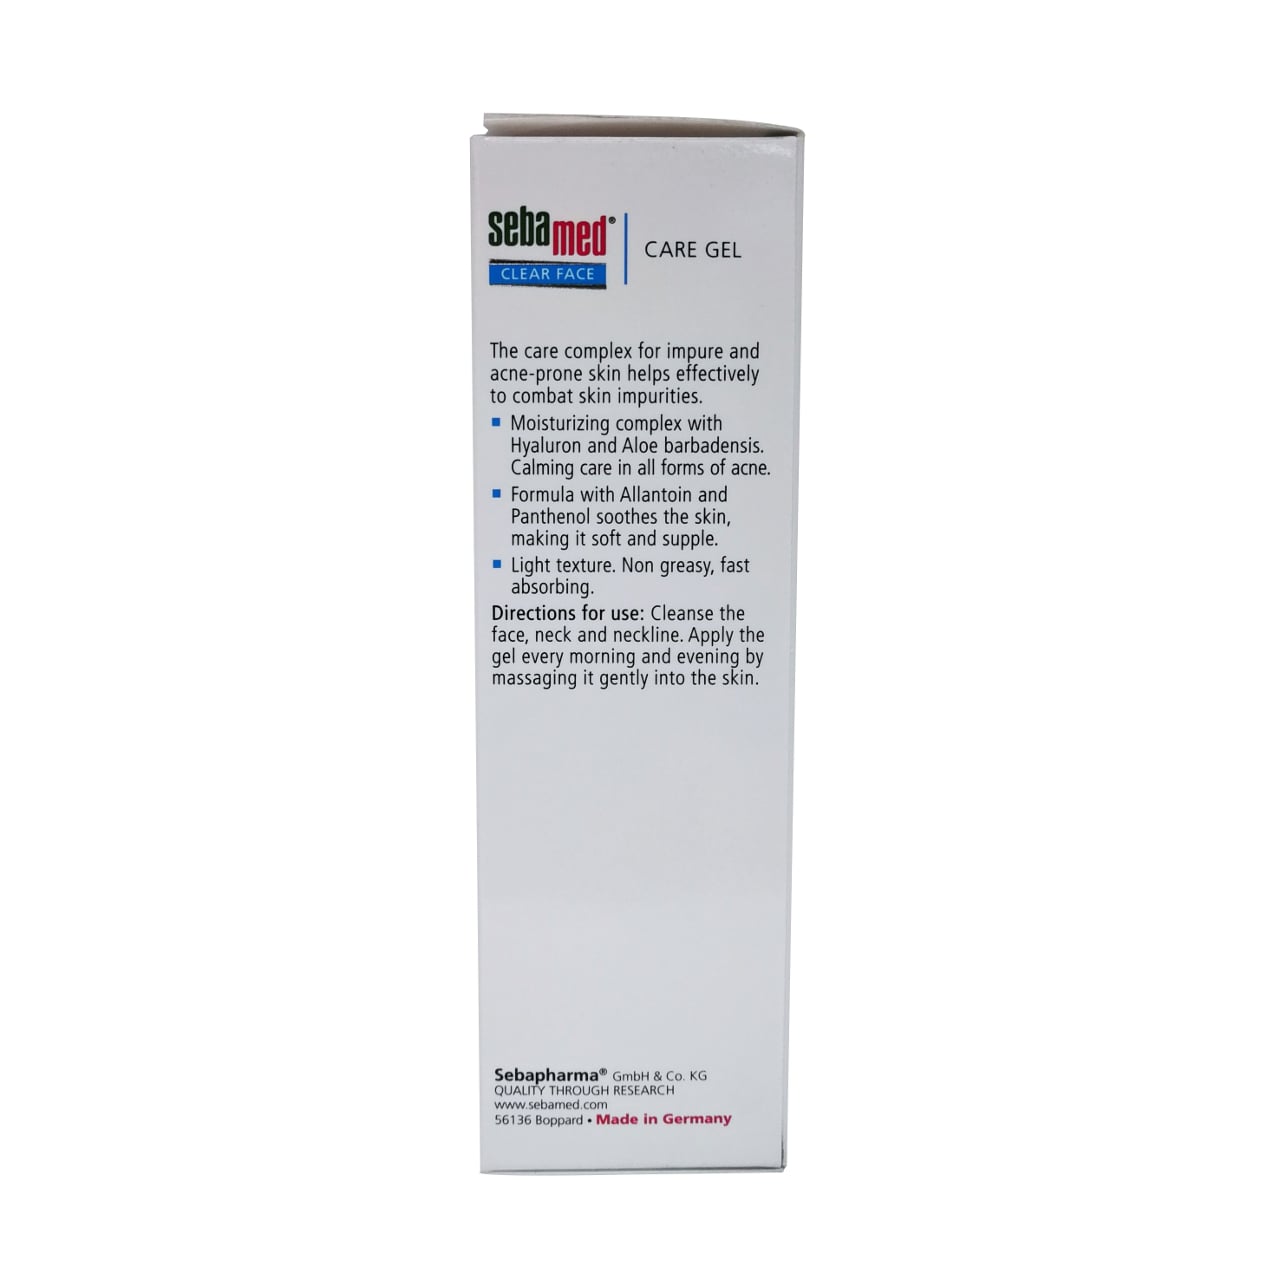 Product details and directions for Sebamed Clear Face Care Gel